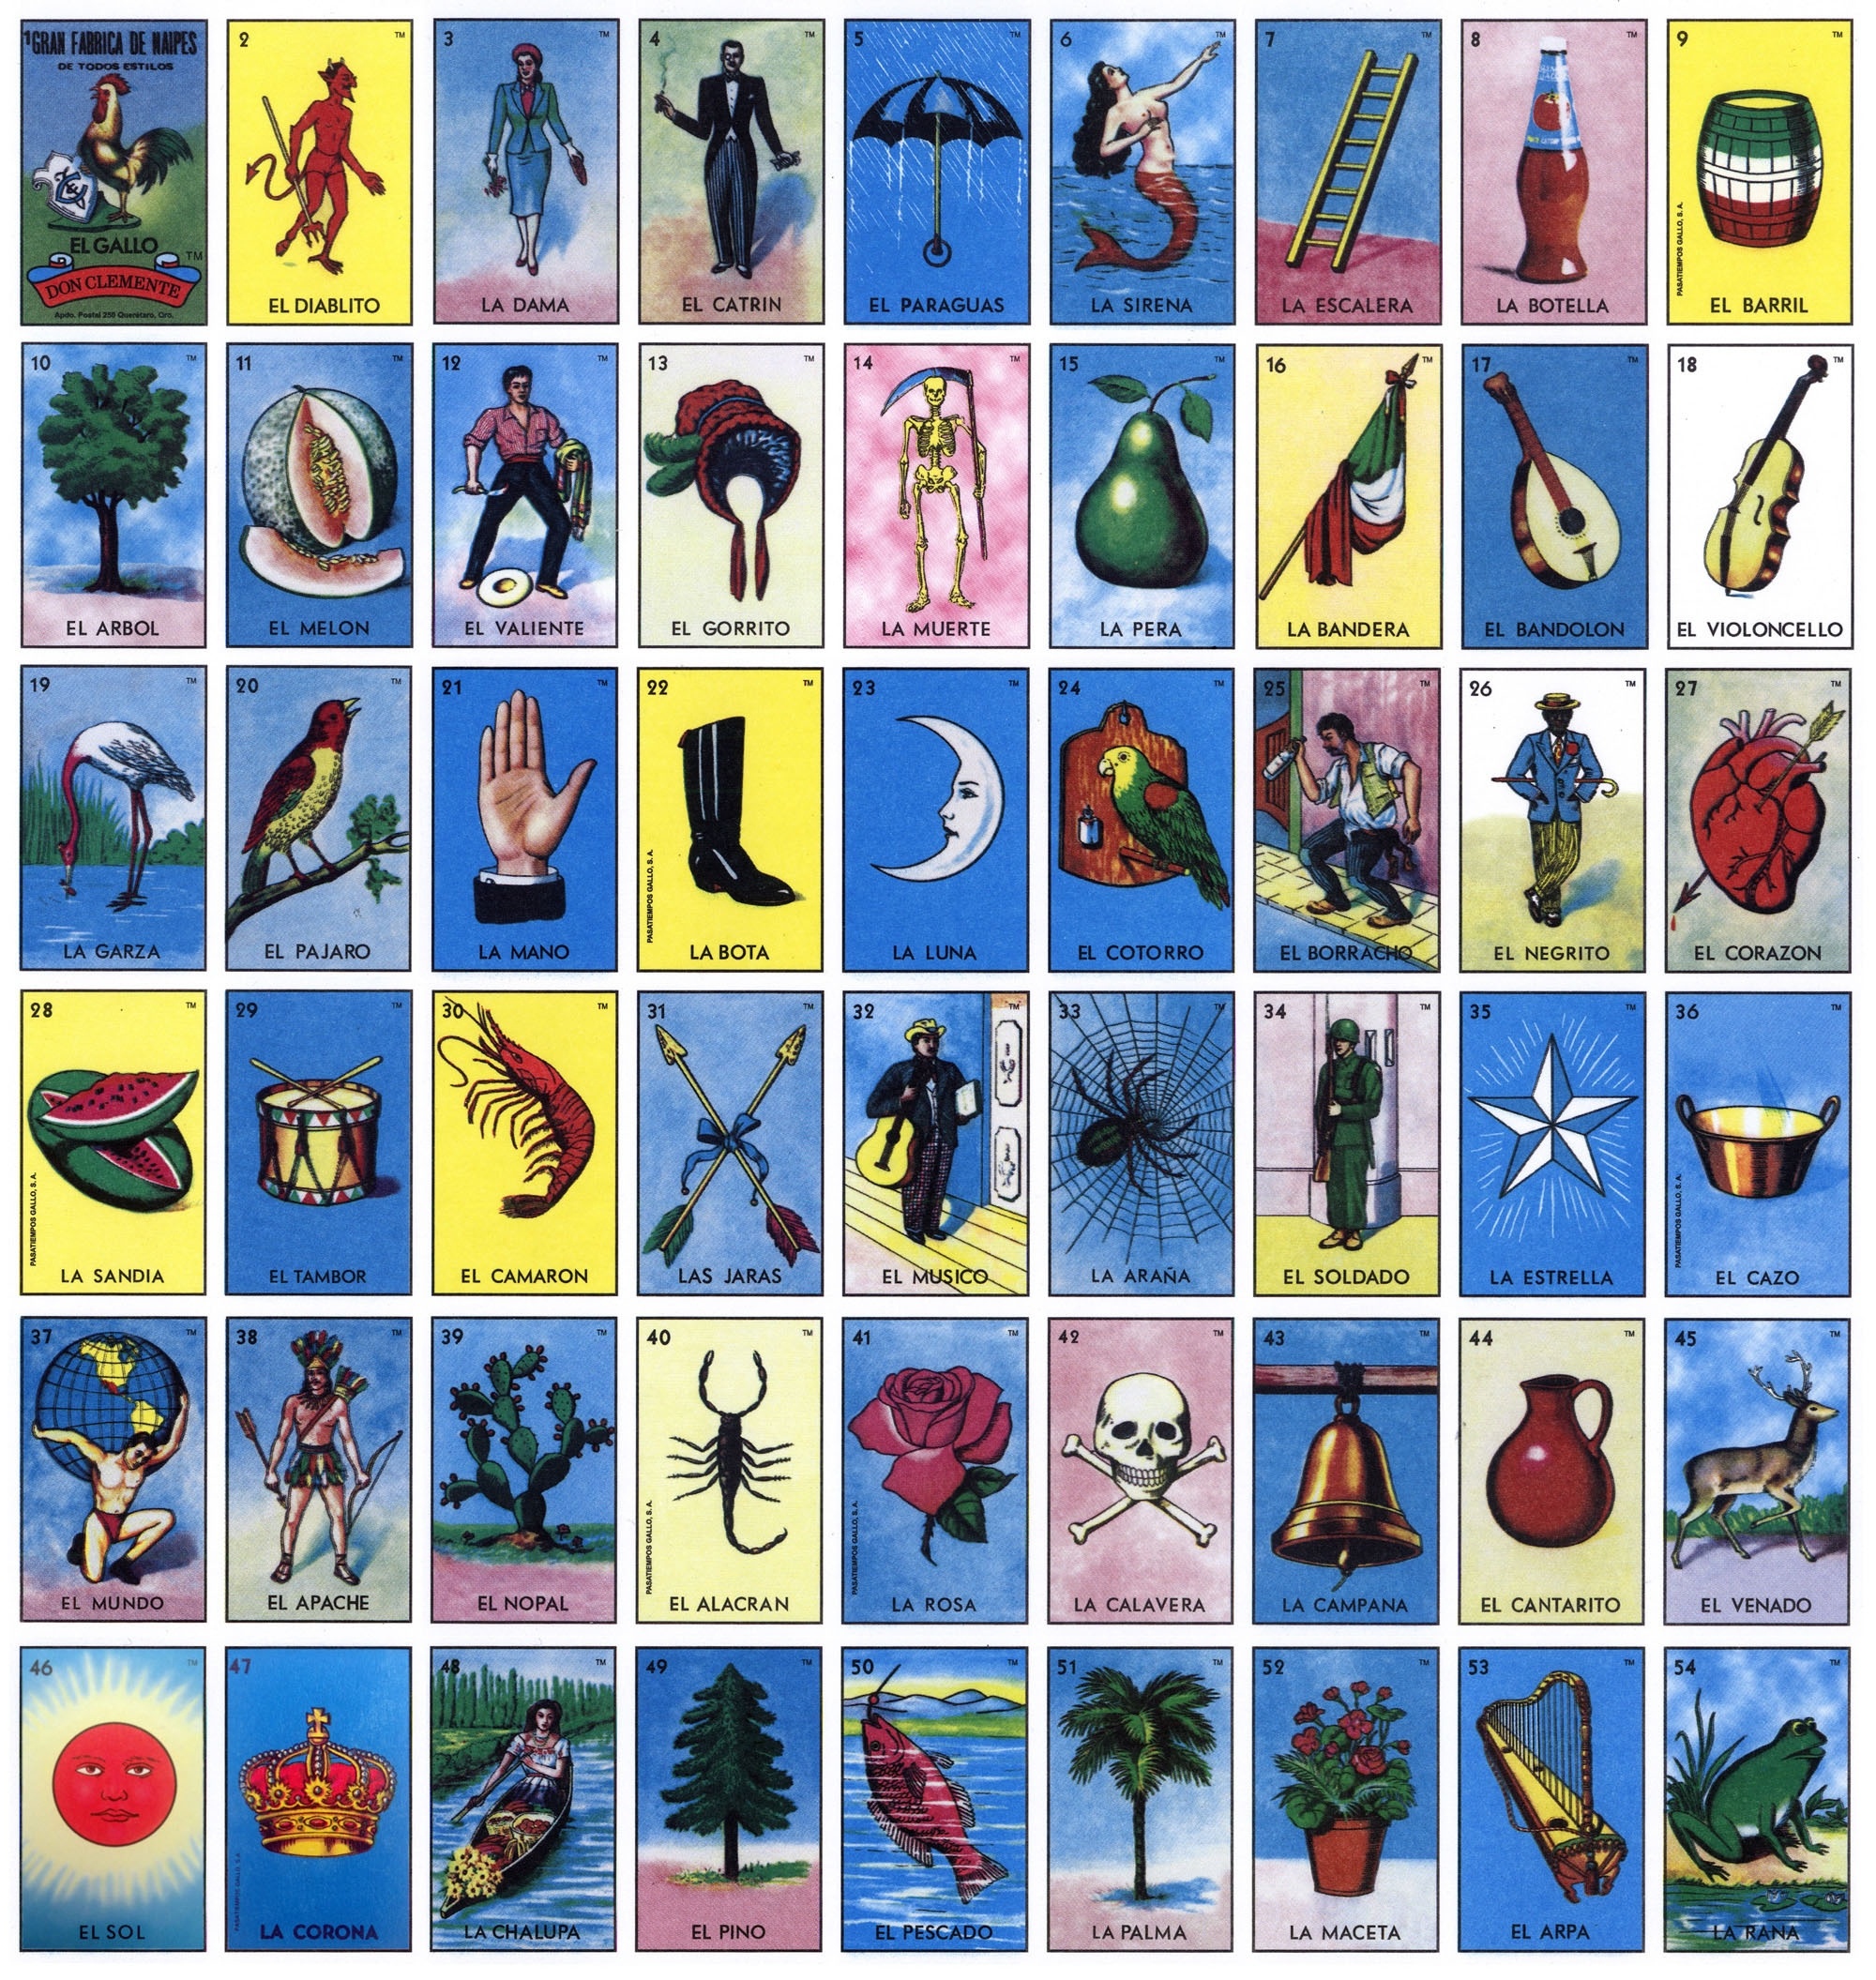 Loteria Is A Super Fun Game Similar To Bingo. This Is Very Popular